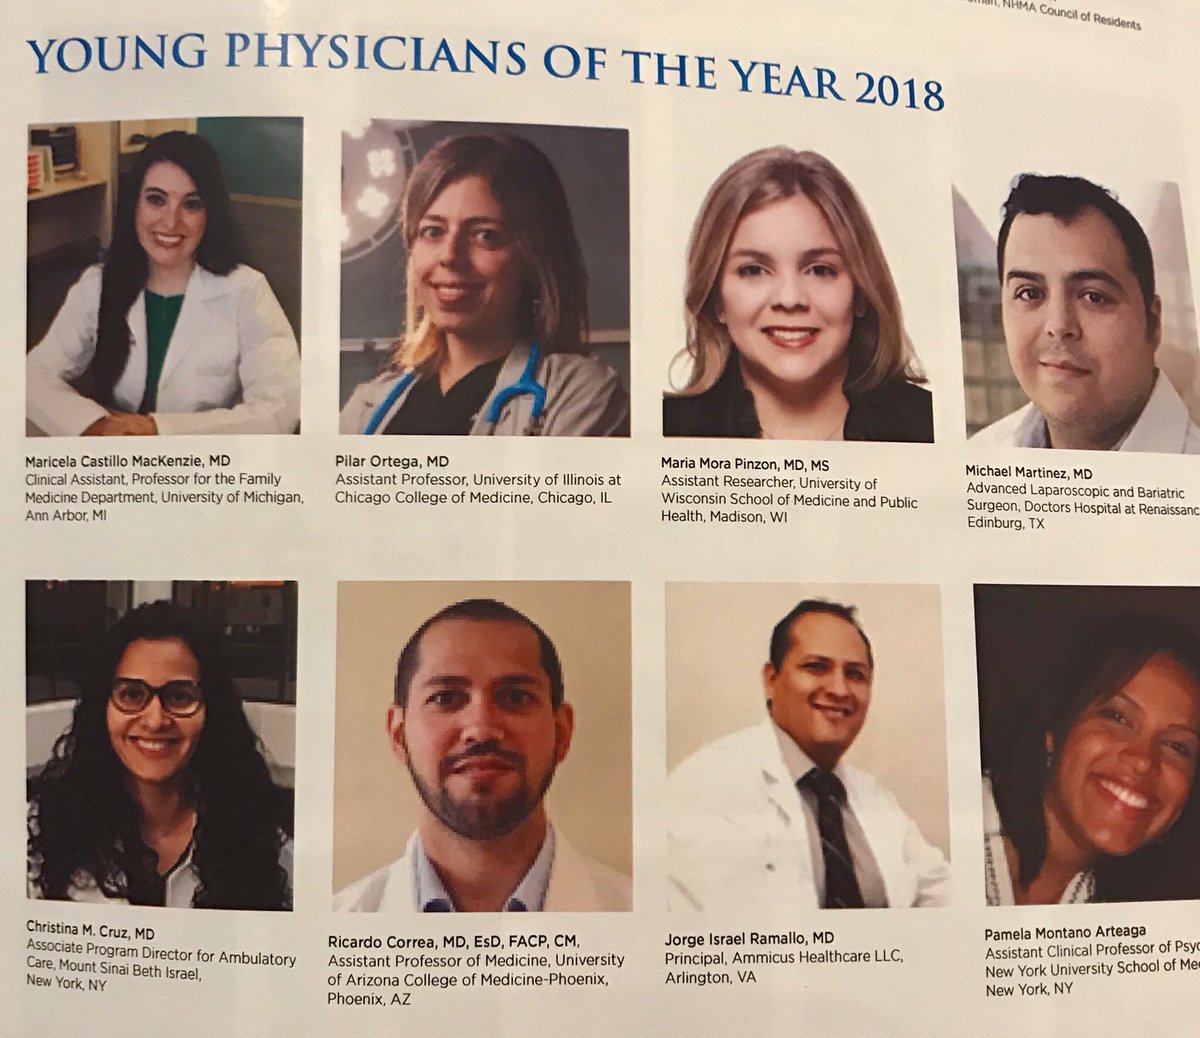 Proud to represent @umfamilymed as a young physician of the year 2018 #NHMA2018 @UMich #LatinoHealth